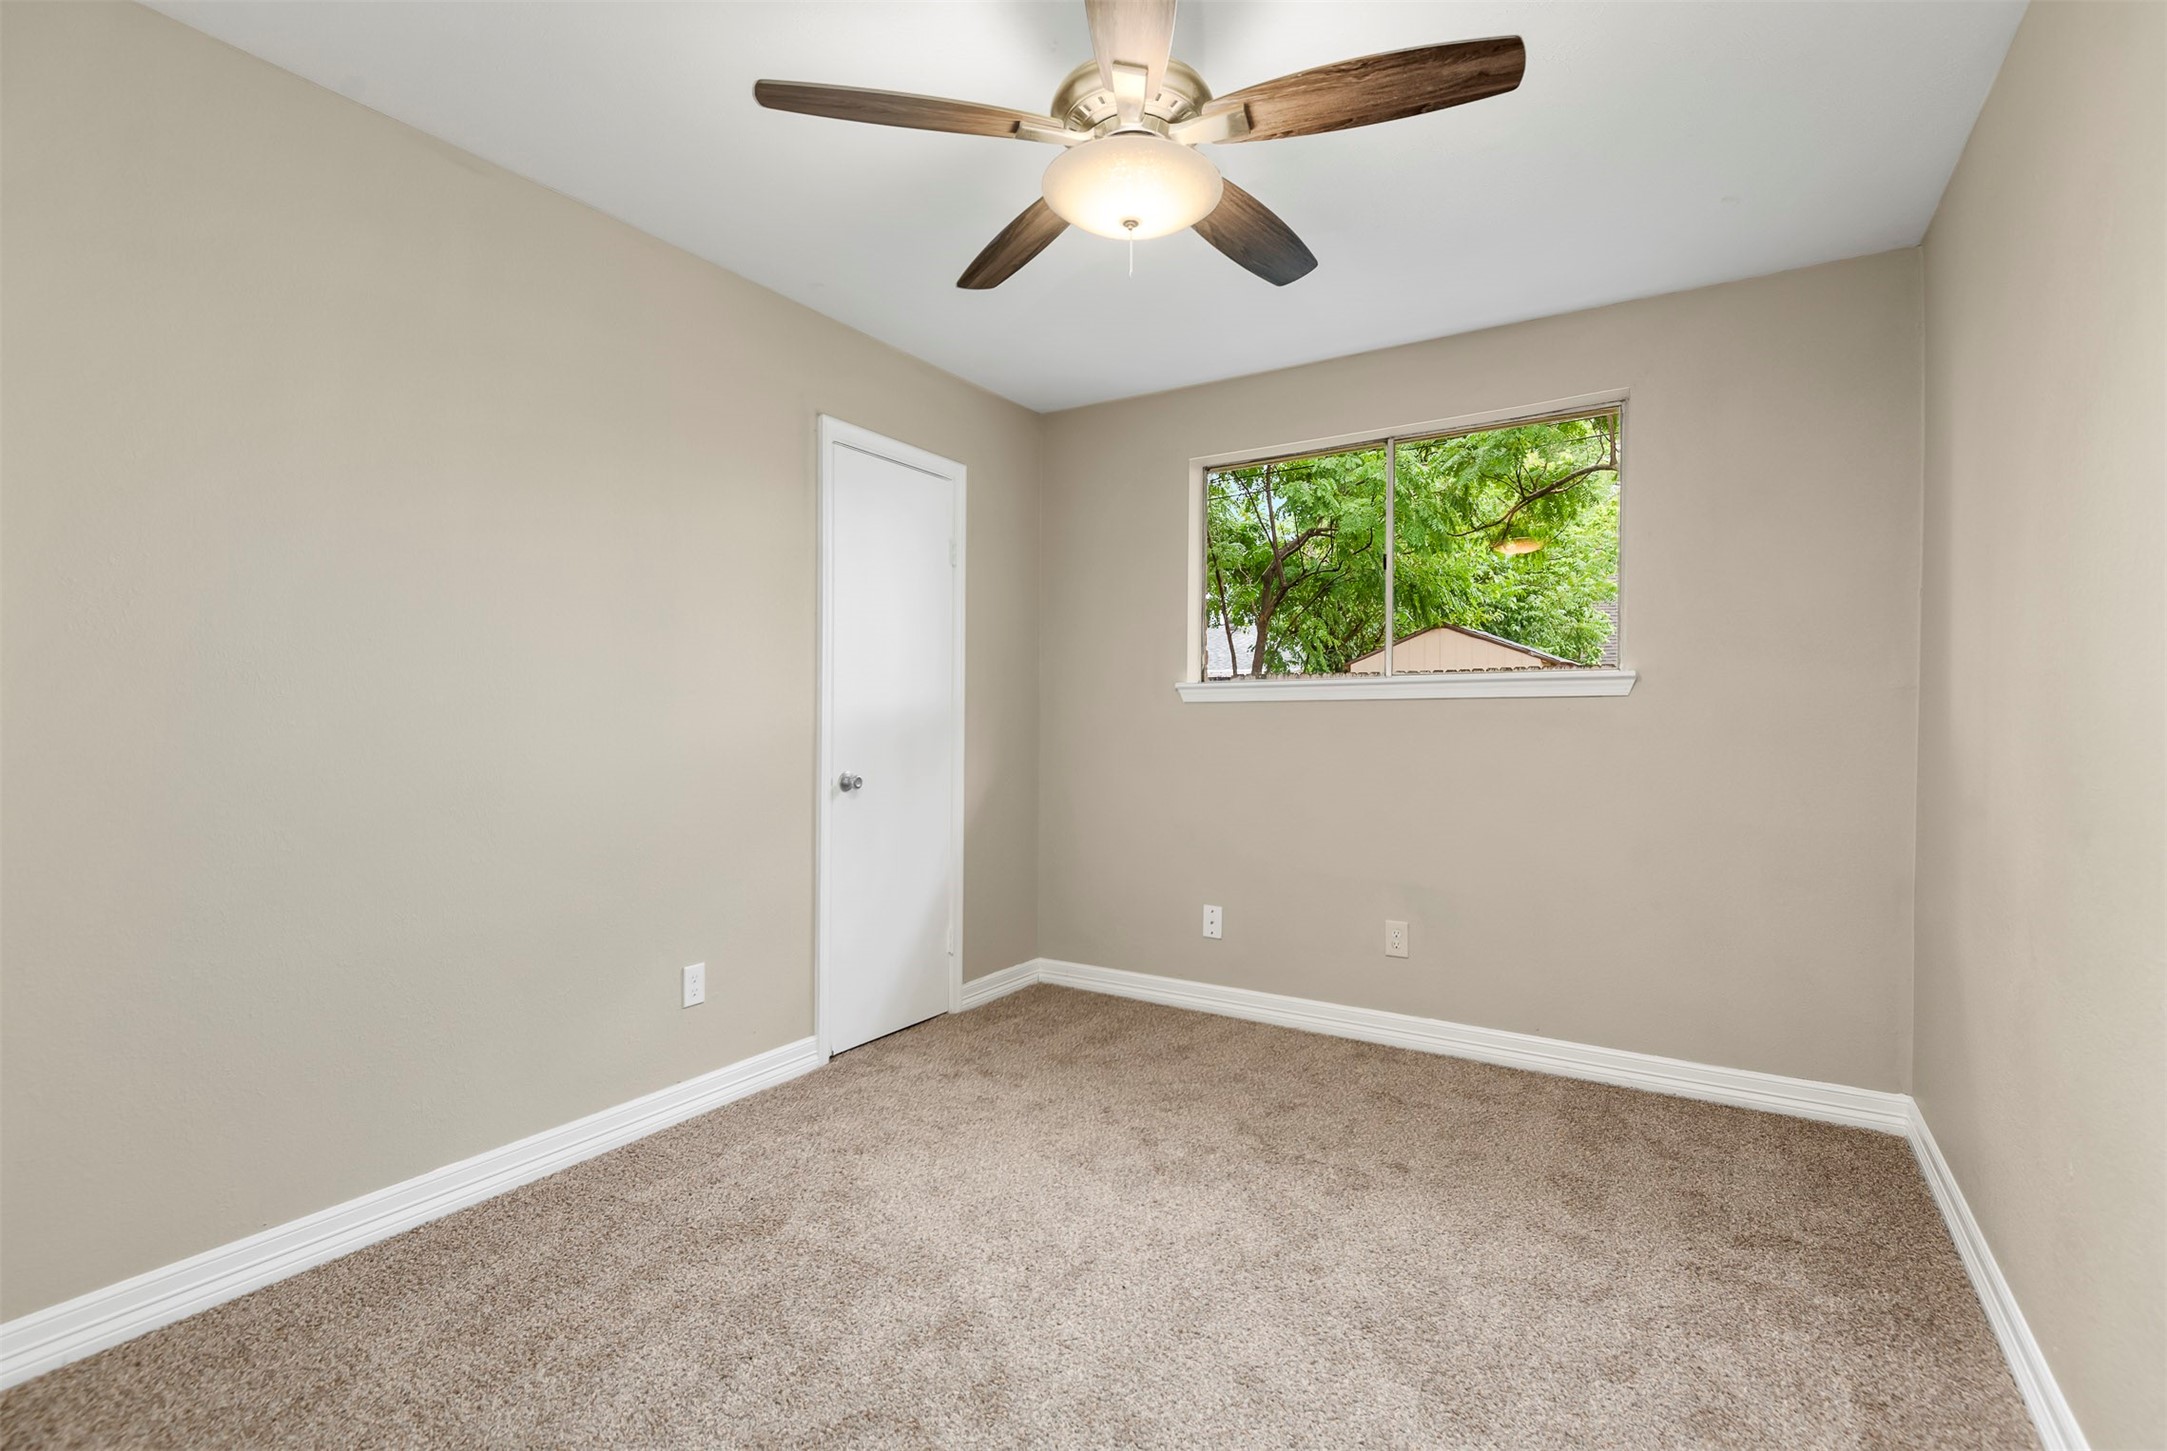 New Carpet - If you have additional questions regarding 11011 Sagewillow Lane  in Houston or would like to tour the property with us call 800-660-1022 and reference MLS# 93340690.